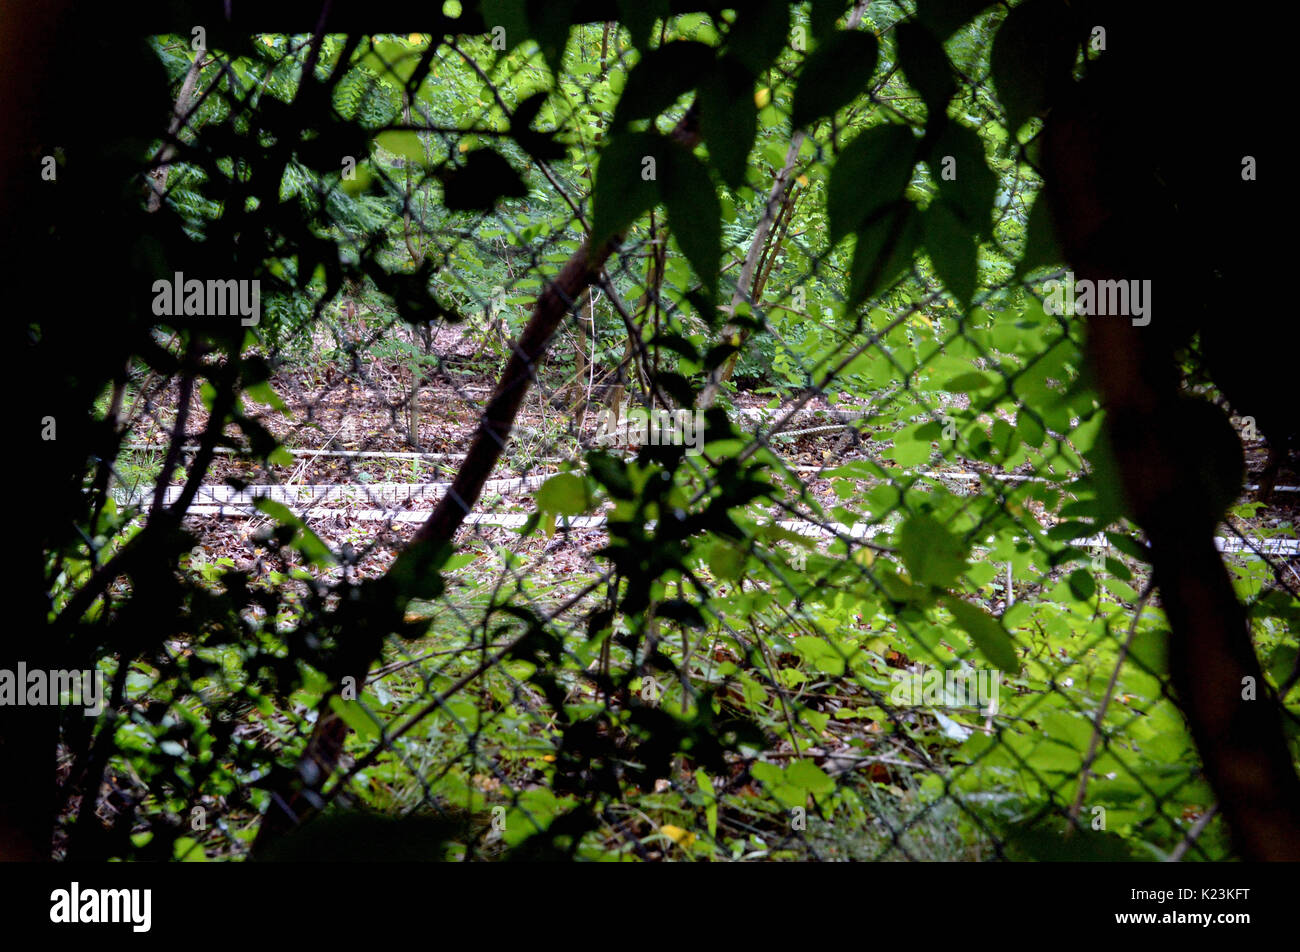 Berlin, Germany. 11th Aug, 2017. A tennis facility - closed and unused since 2007 - in a listed residential facility near to the Schaubuhne photographed through bushes and a fence in Berlin, Germany, 11 August 2017. Author Vladimir Nabokov used to give tennis lessons here in the 1920s. He gained worldwide recognition with his novel, 'Lolita', the basis for which Nabokov laid in Berlin. Photo: Christina Peters/dpa/Alamy Live News Stock Photo